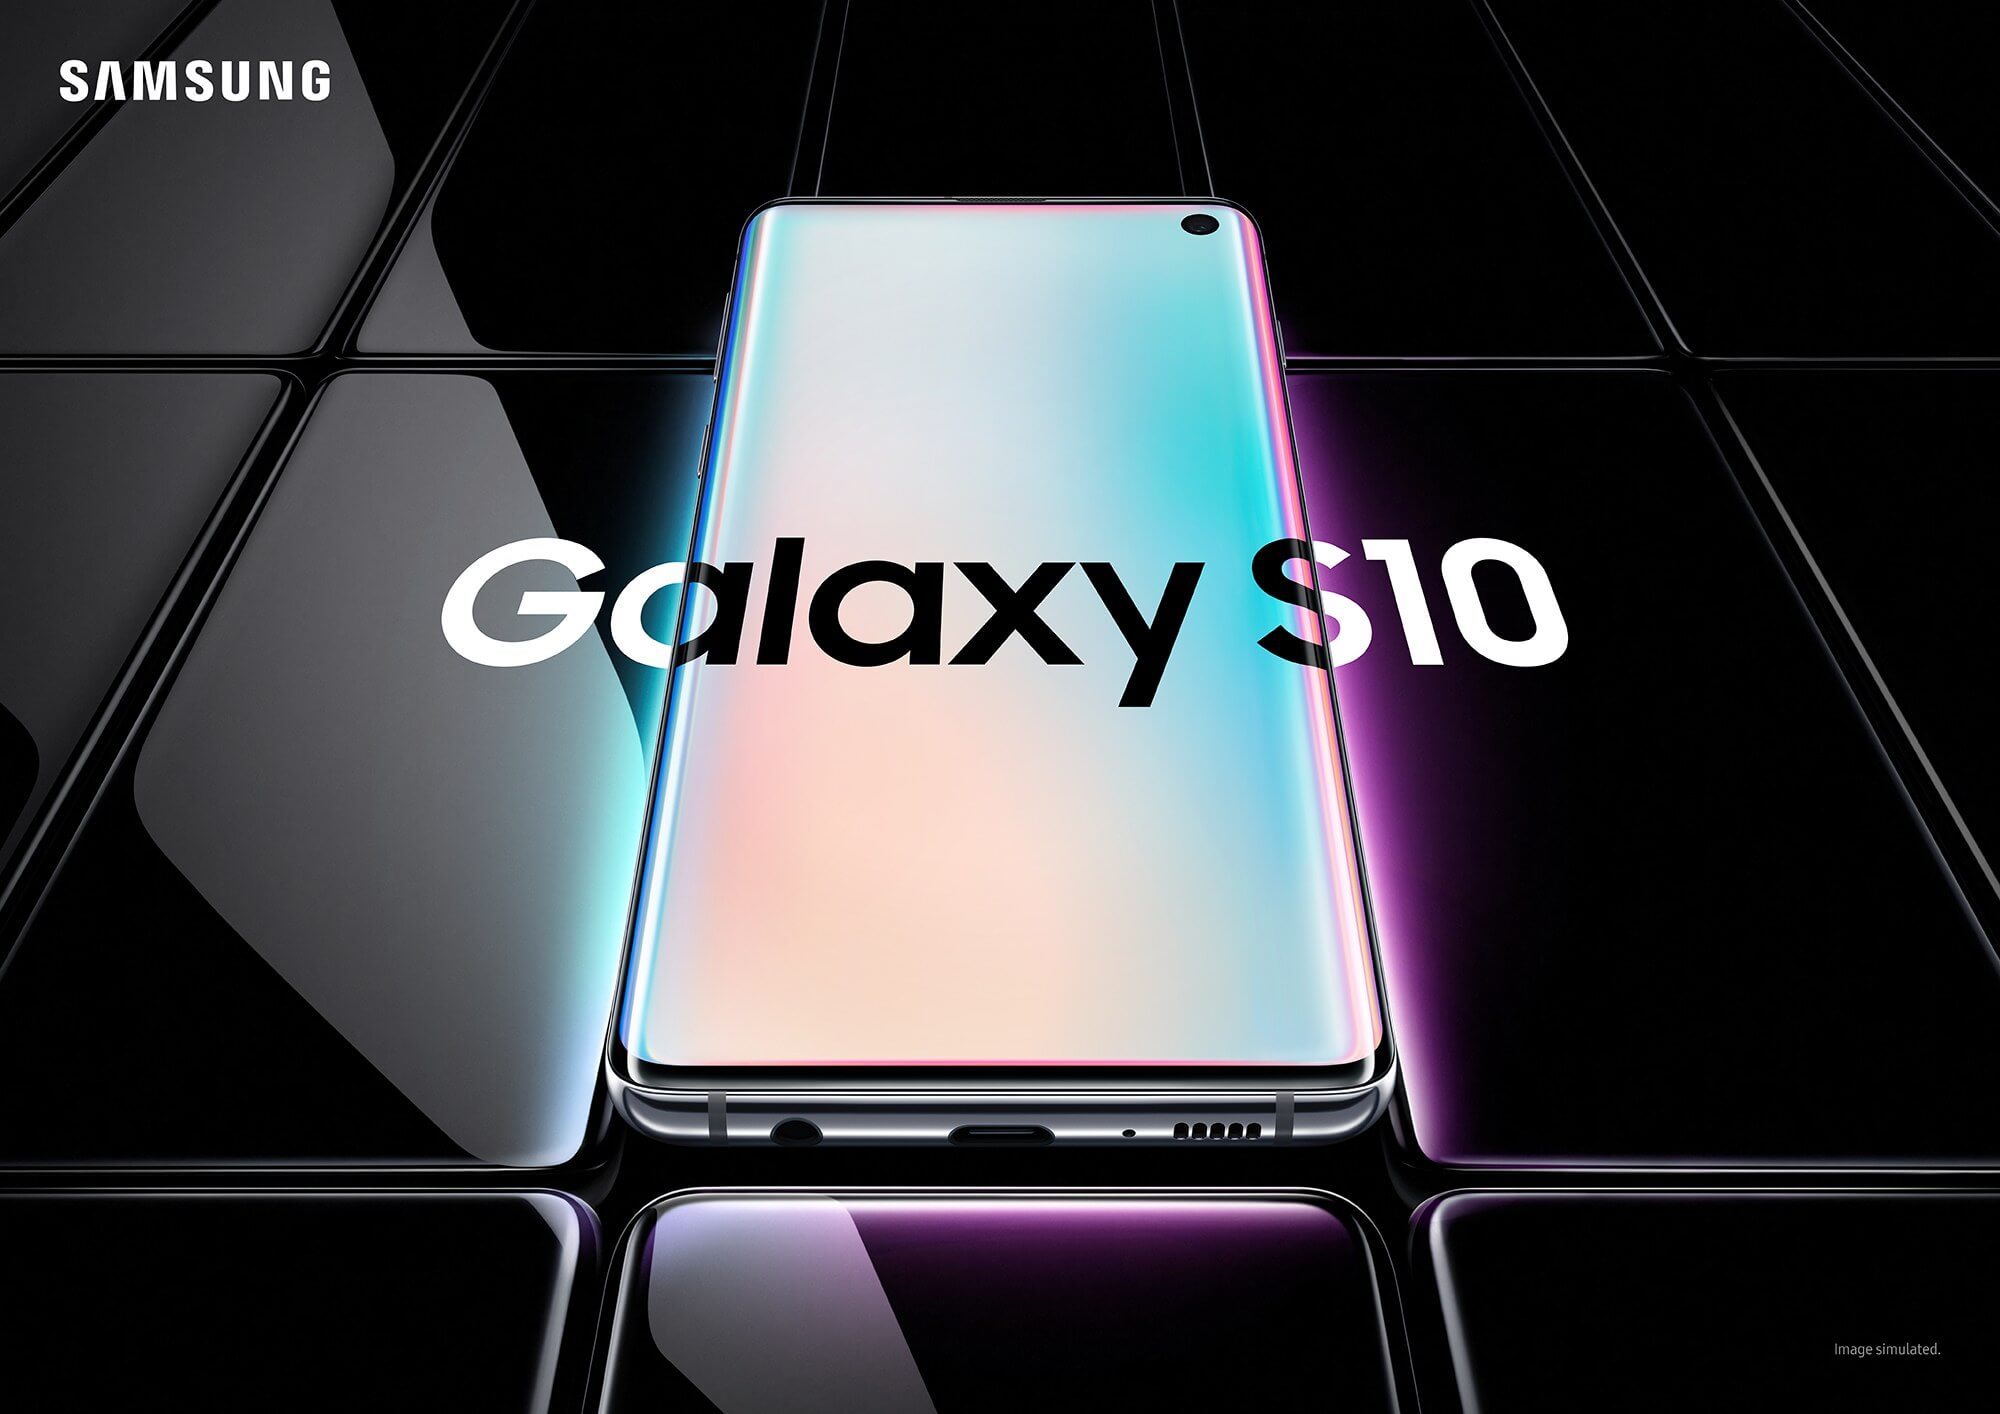 Samsung unveils Galaxy S10, S10e, and S10 Plus with embedded fingerprint scanning and more